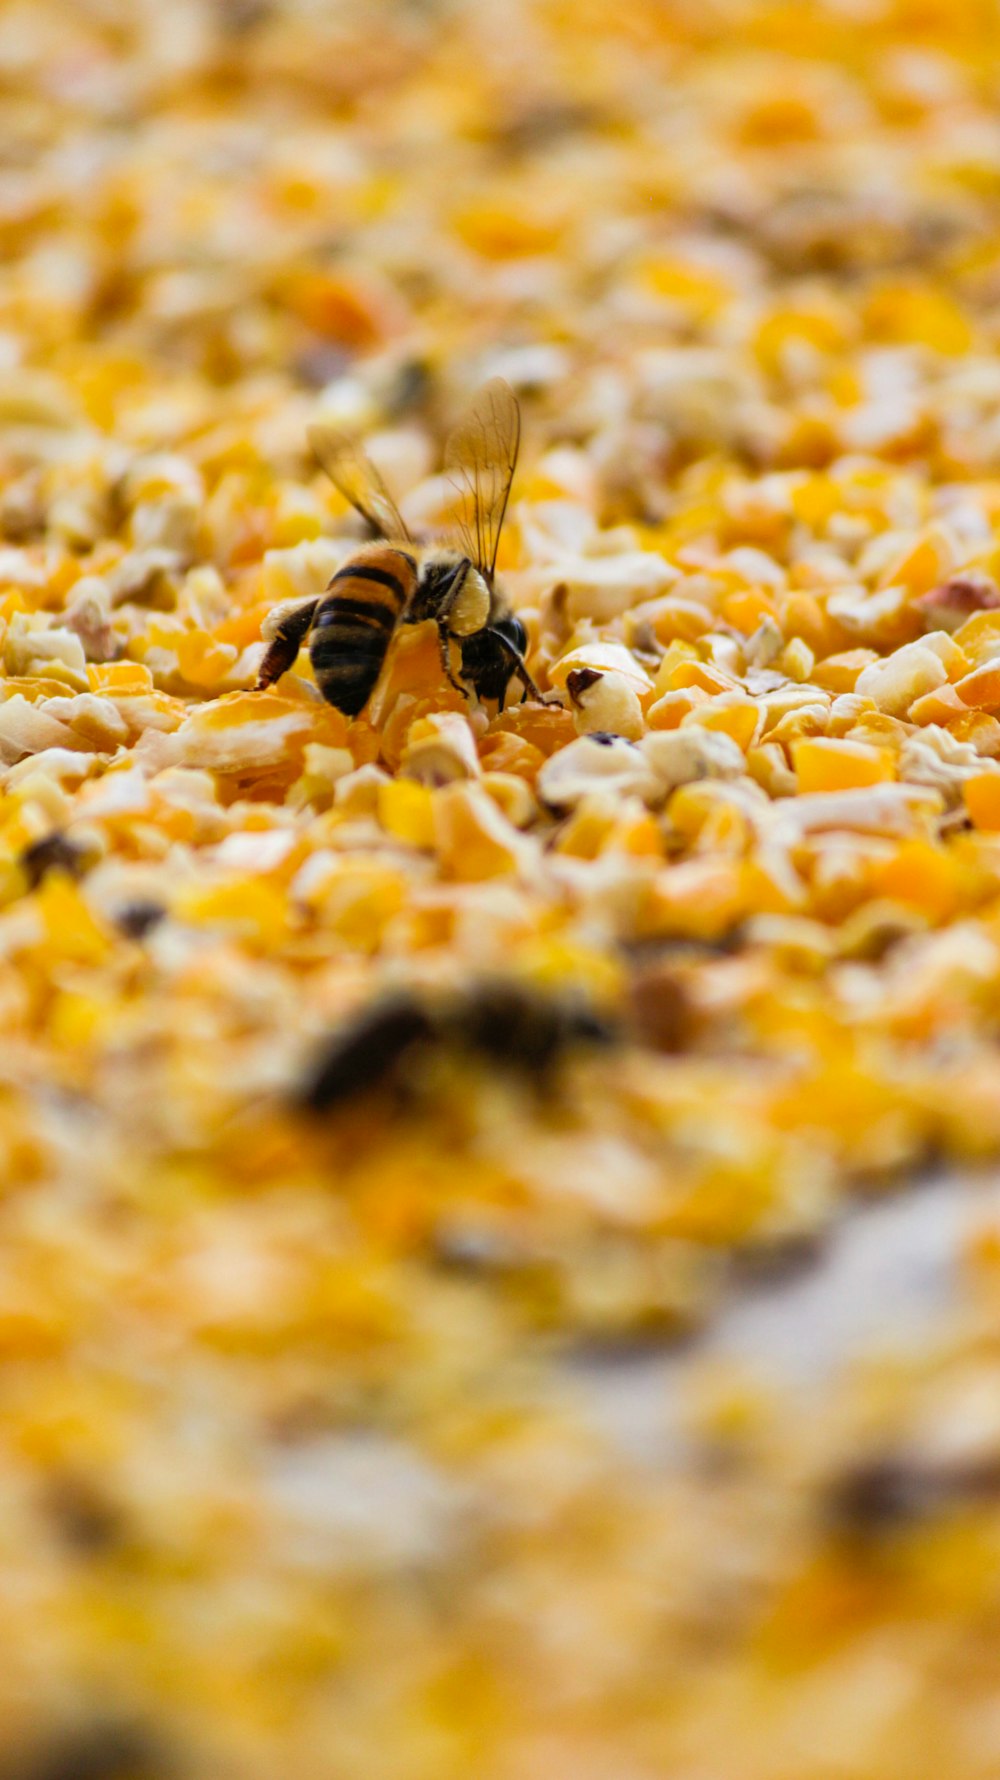 honeybee perched on yellow and white flower petals